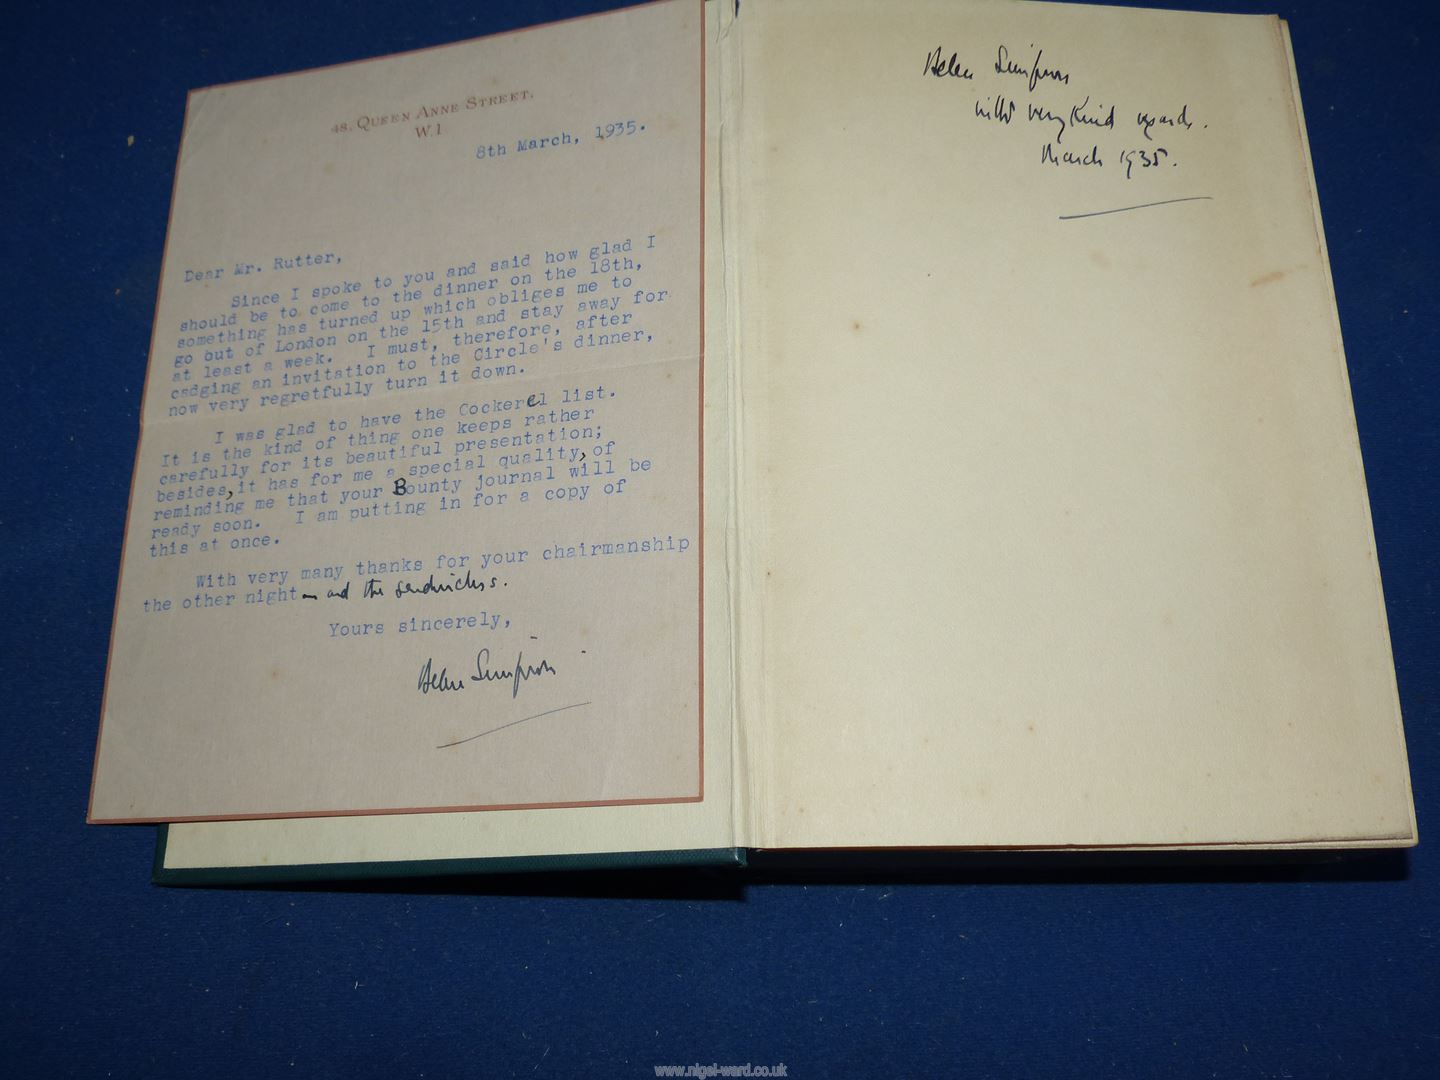 A first edition Copy of Saraband for Dead Lovers by Helen Simpson 1935 containing a letter to Mr. - Image 2 of 7